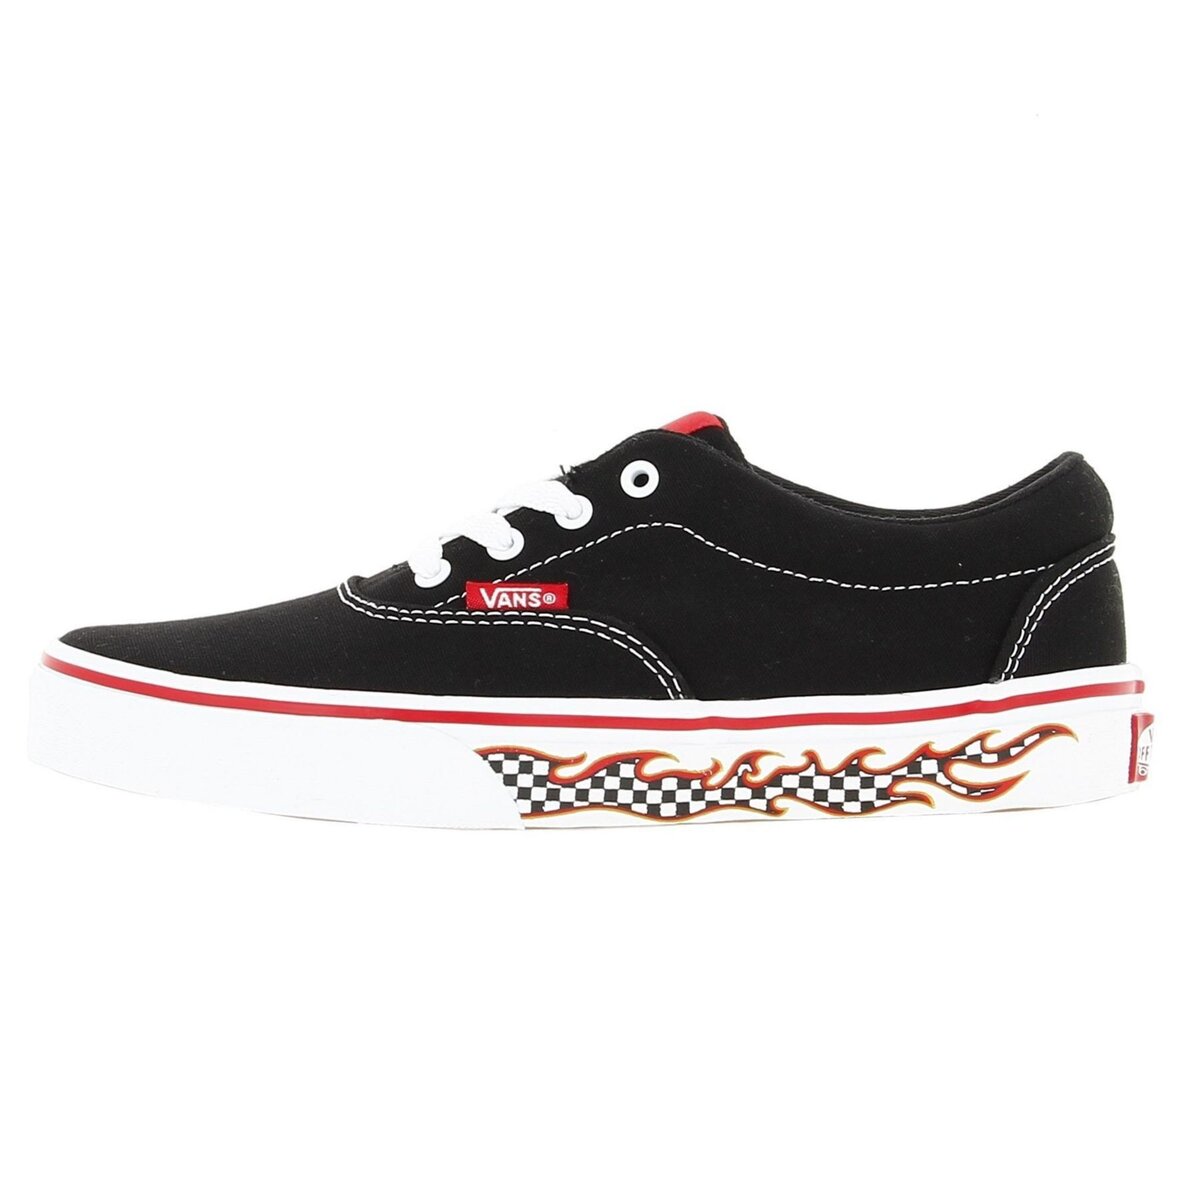 VANS Chaussures basses toile Vans Yt doheny  5-134